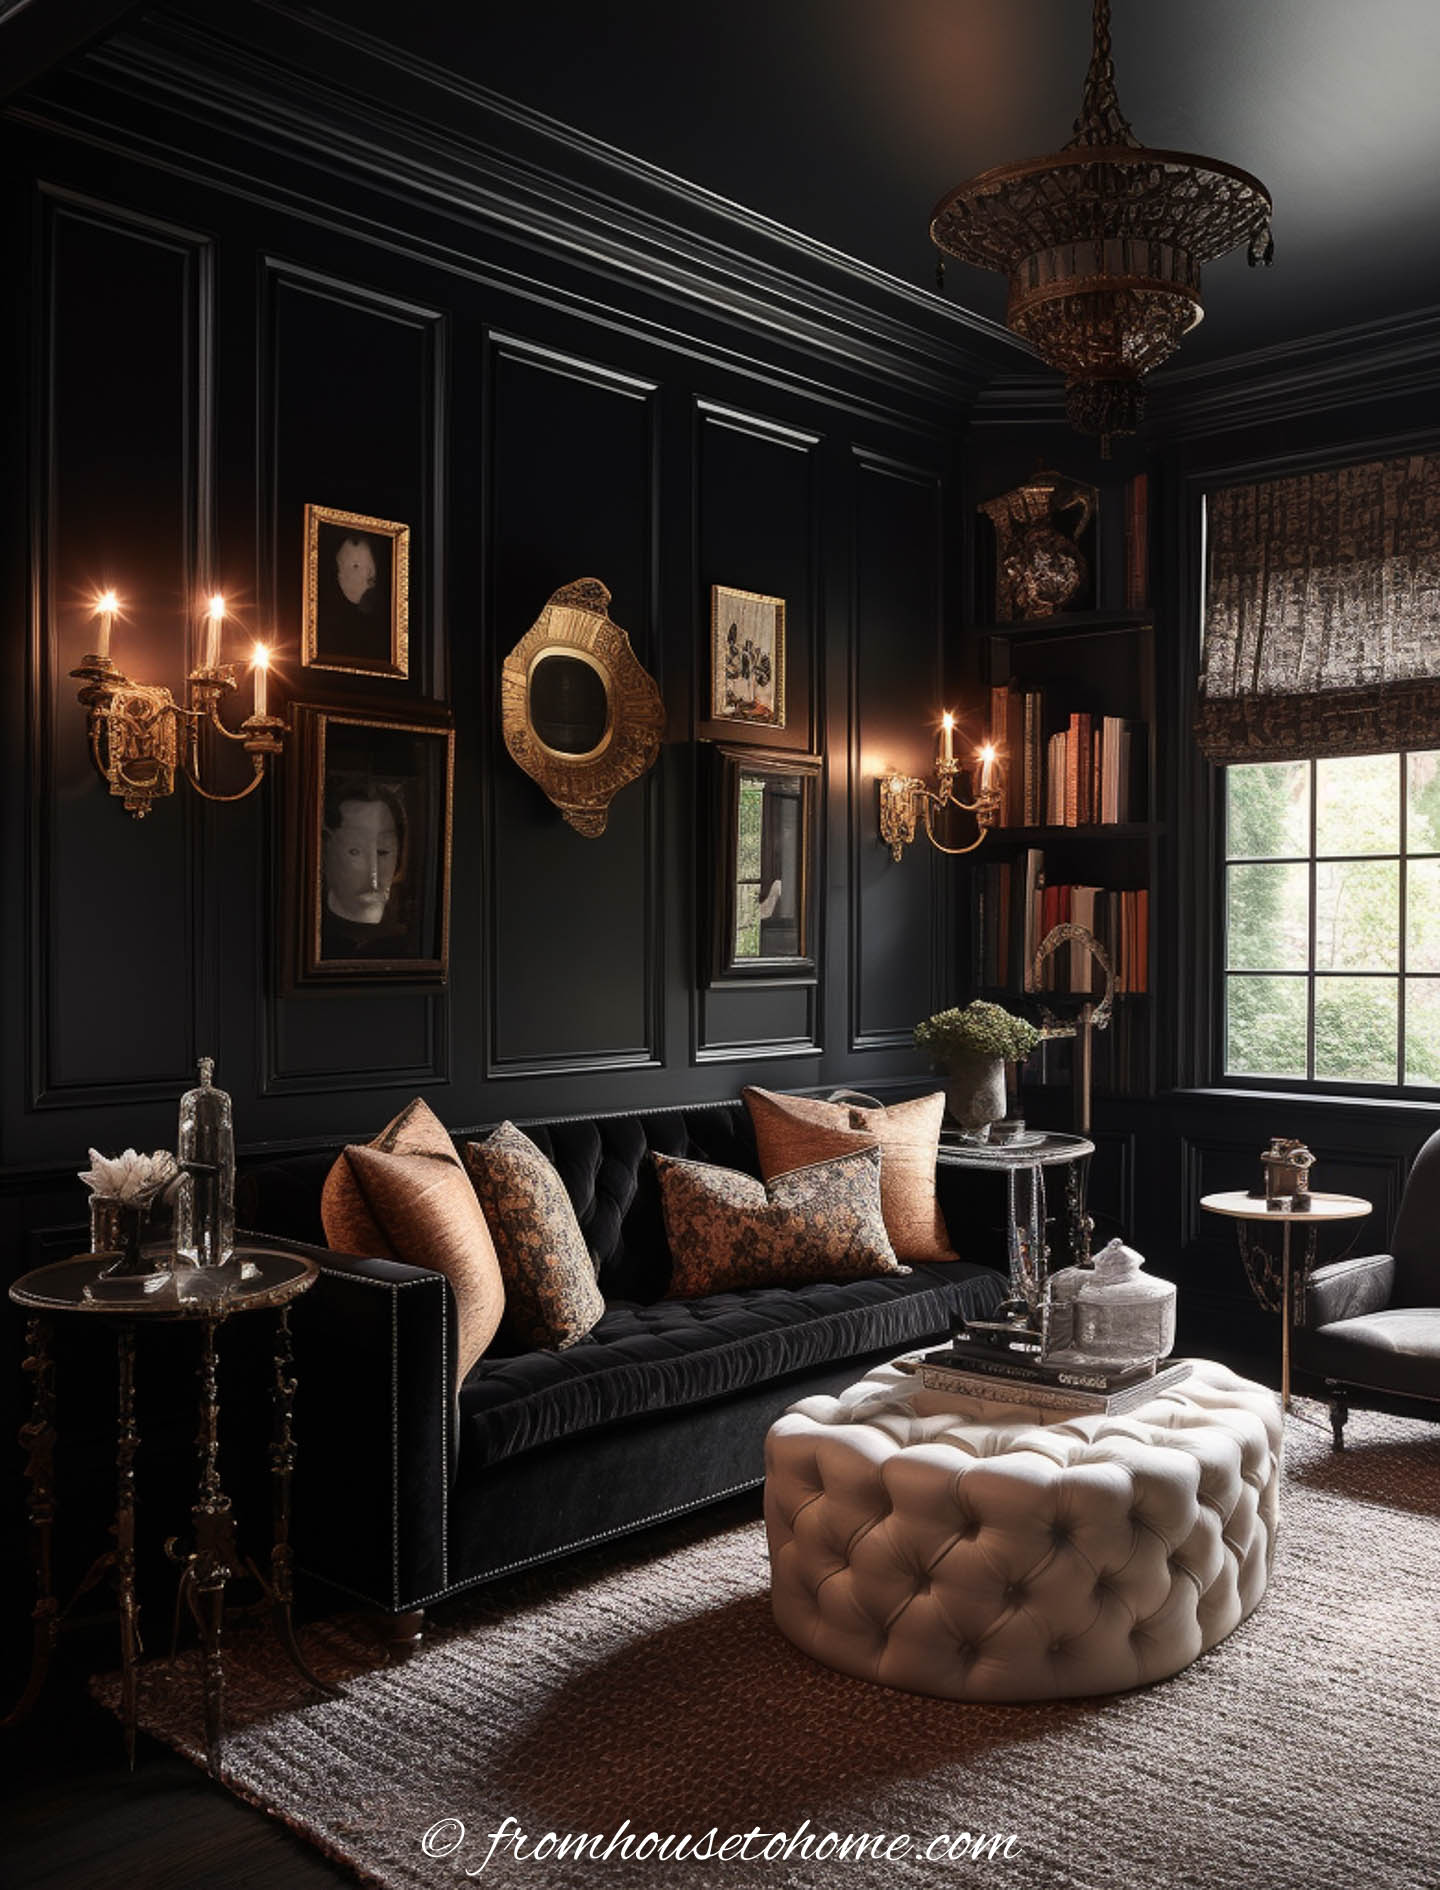 A living room with black walls and ceiling, a black sofa an a white ottoman